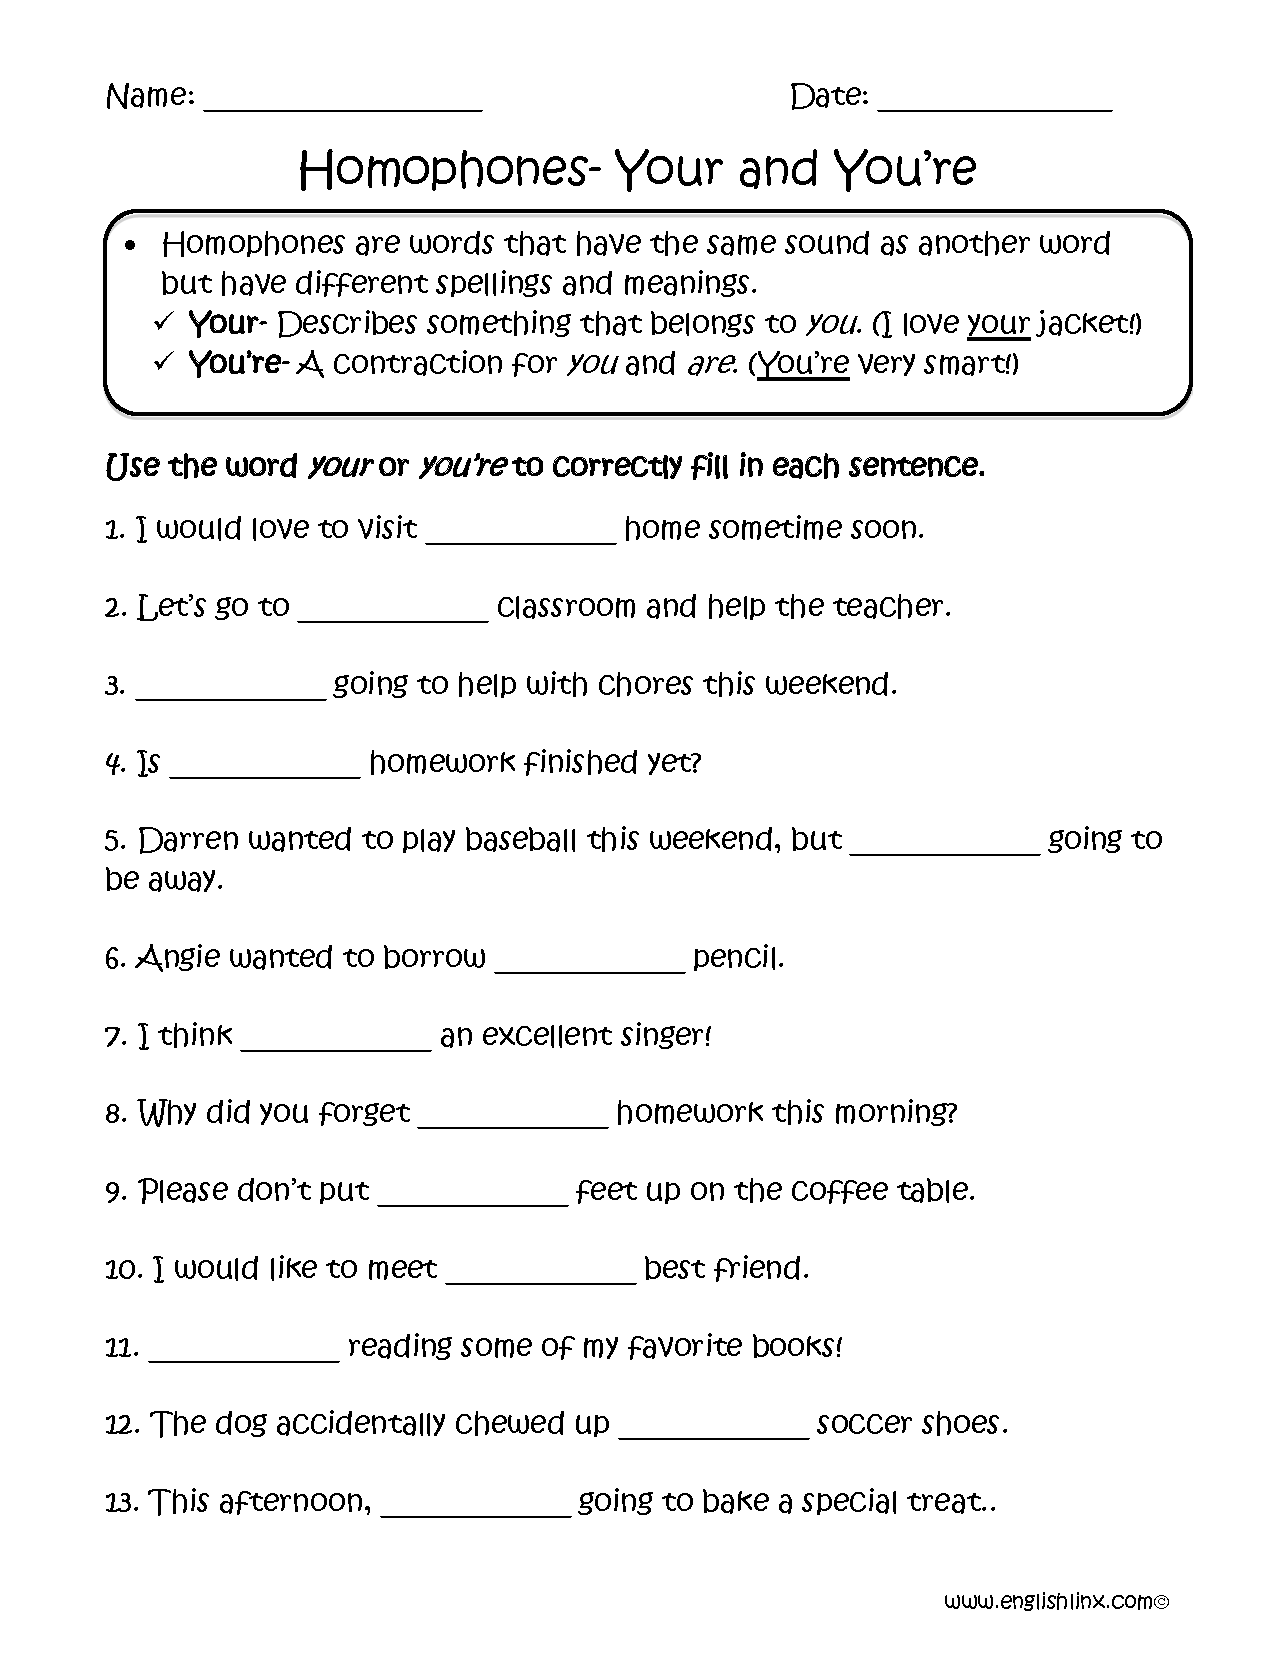 Homophone Worksheets Your and Youre Image